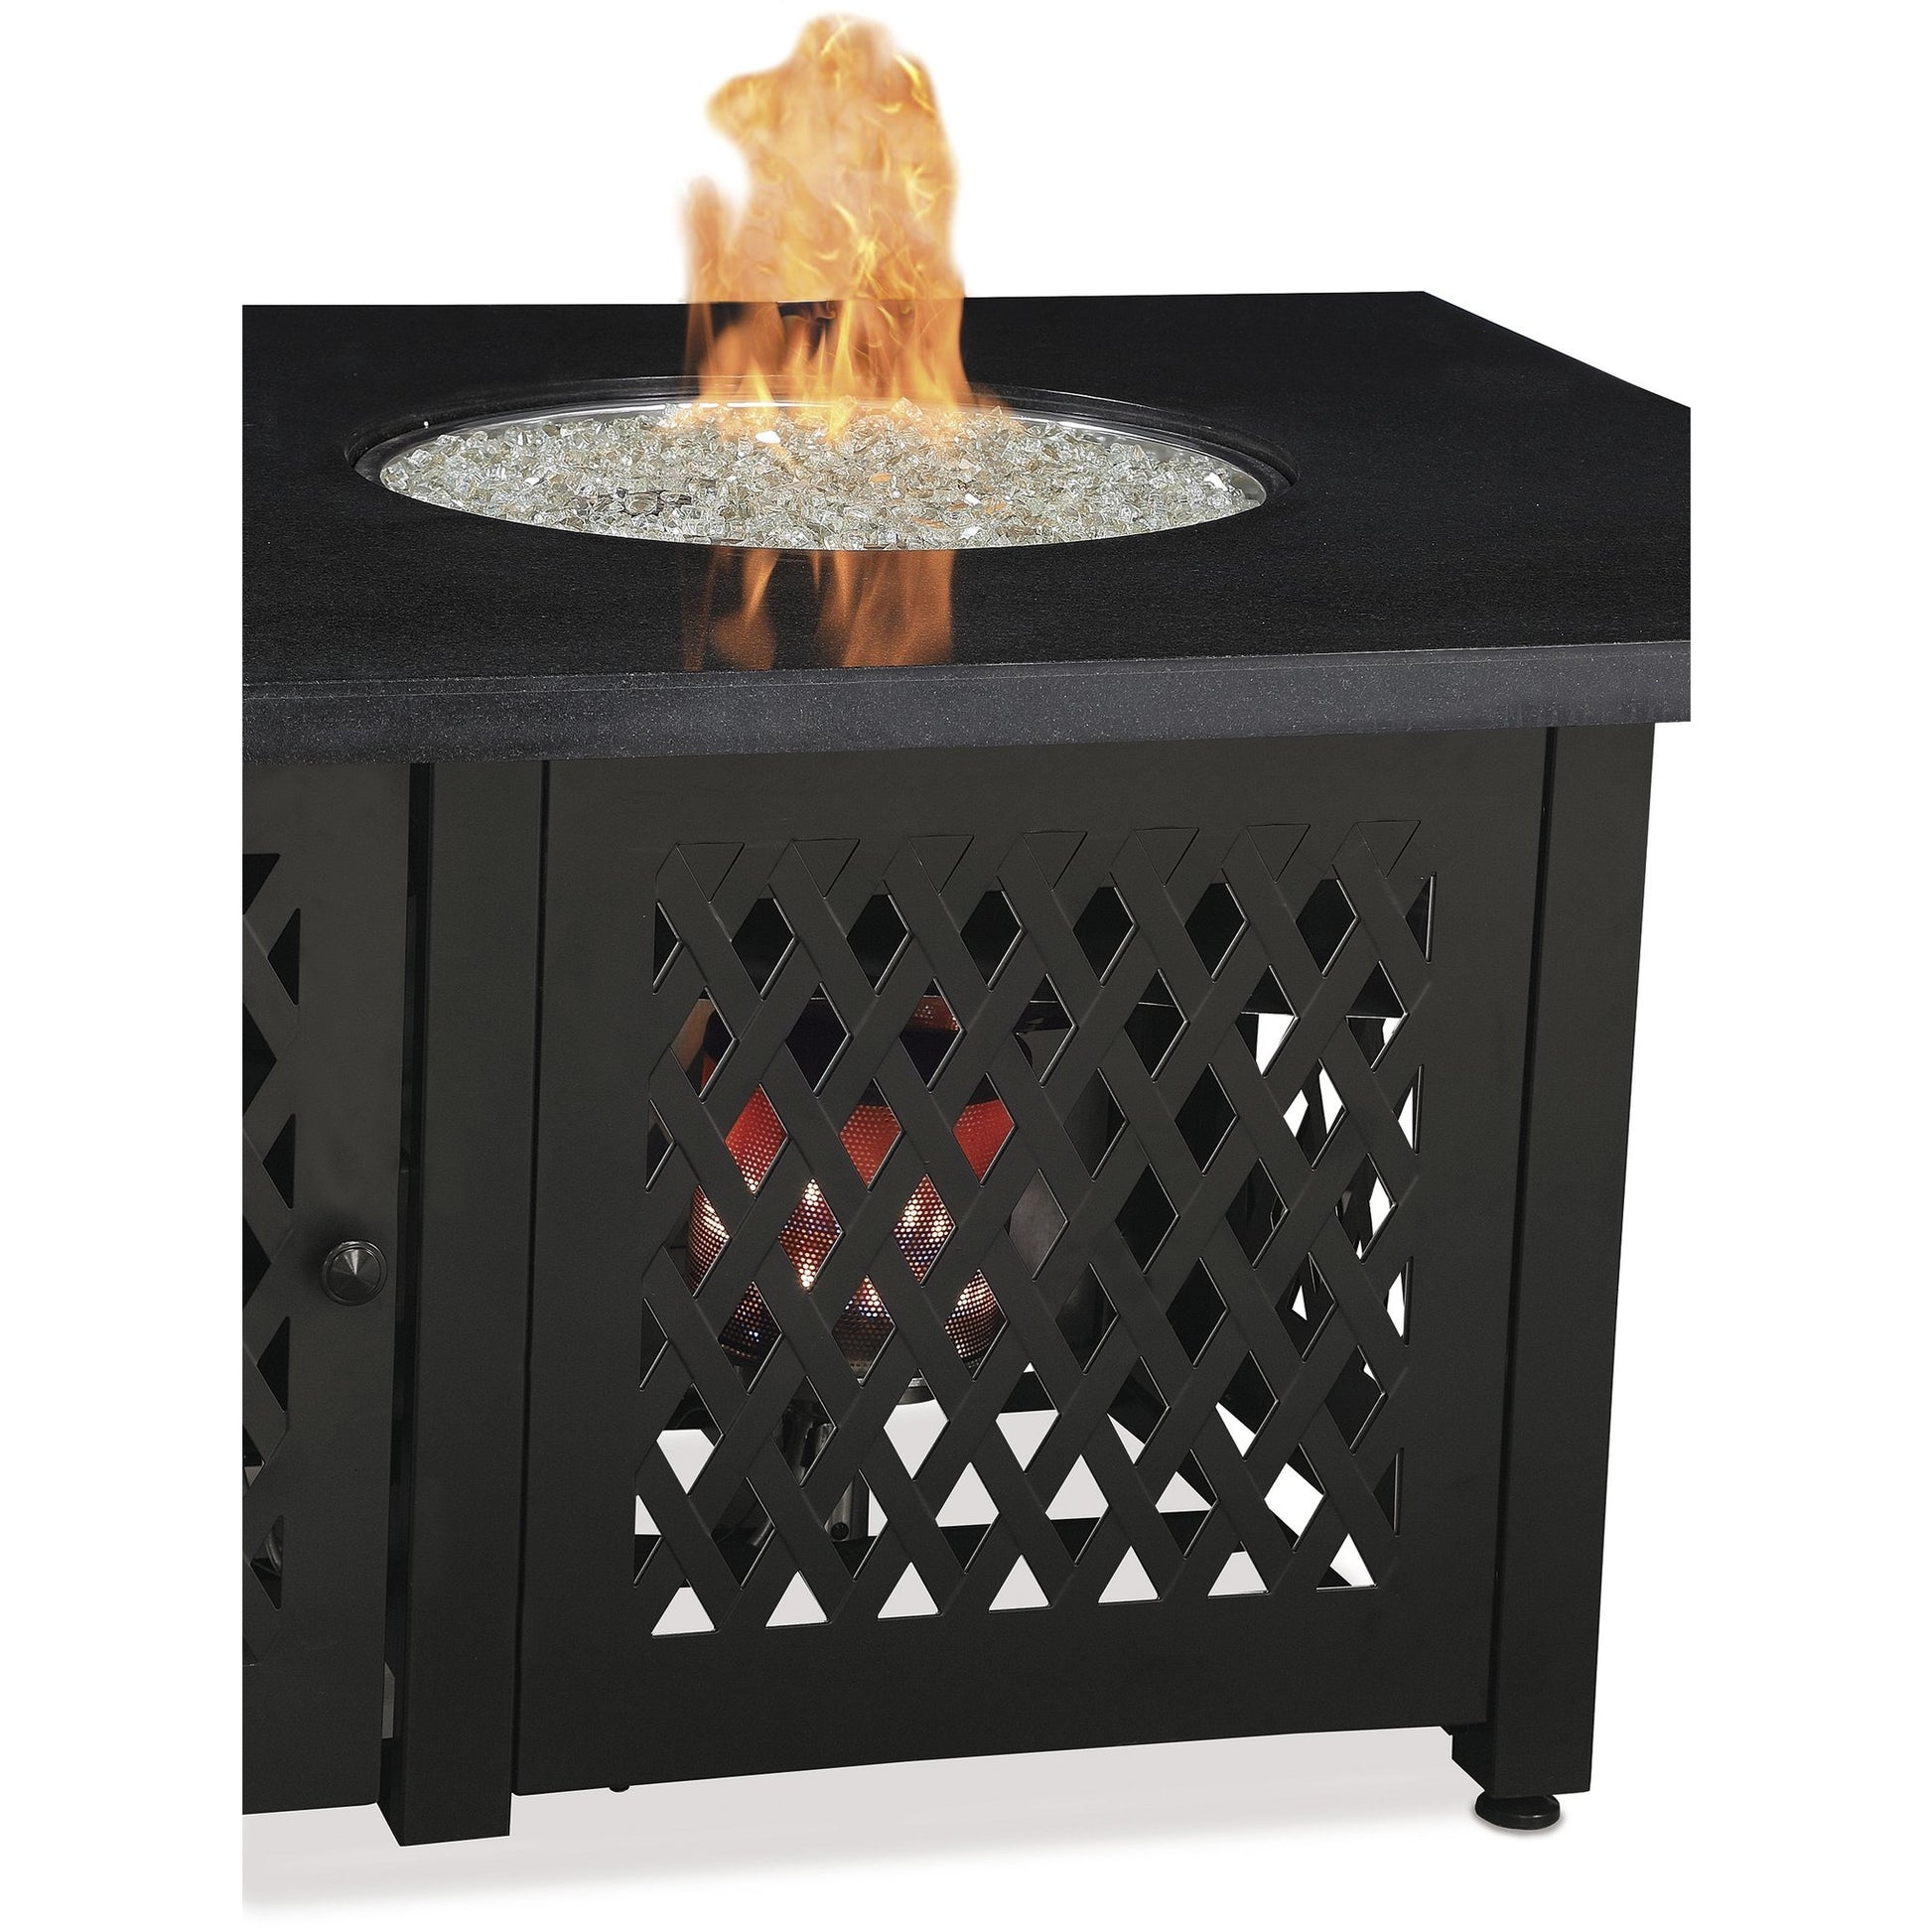 Endless Summer LP Gas Outdoor Fire Pit with Dual Heat Technology and Granite Mantel GAD18100M freeshipping - Luxury Tech Inc.